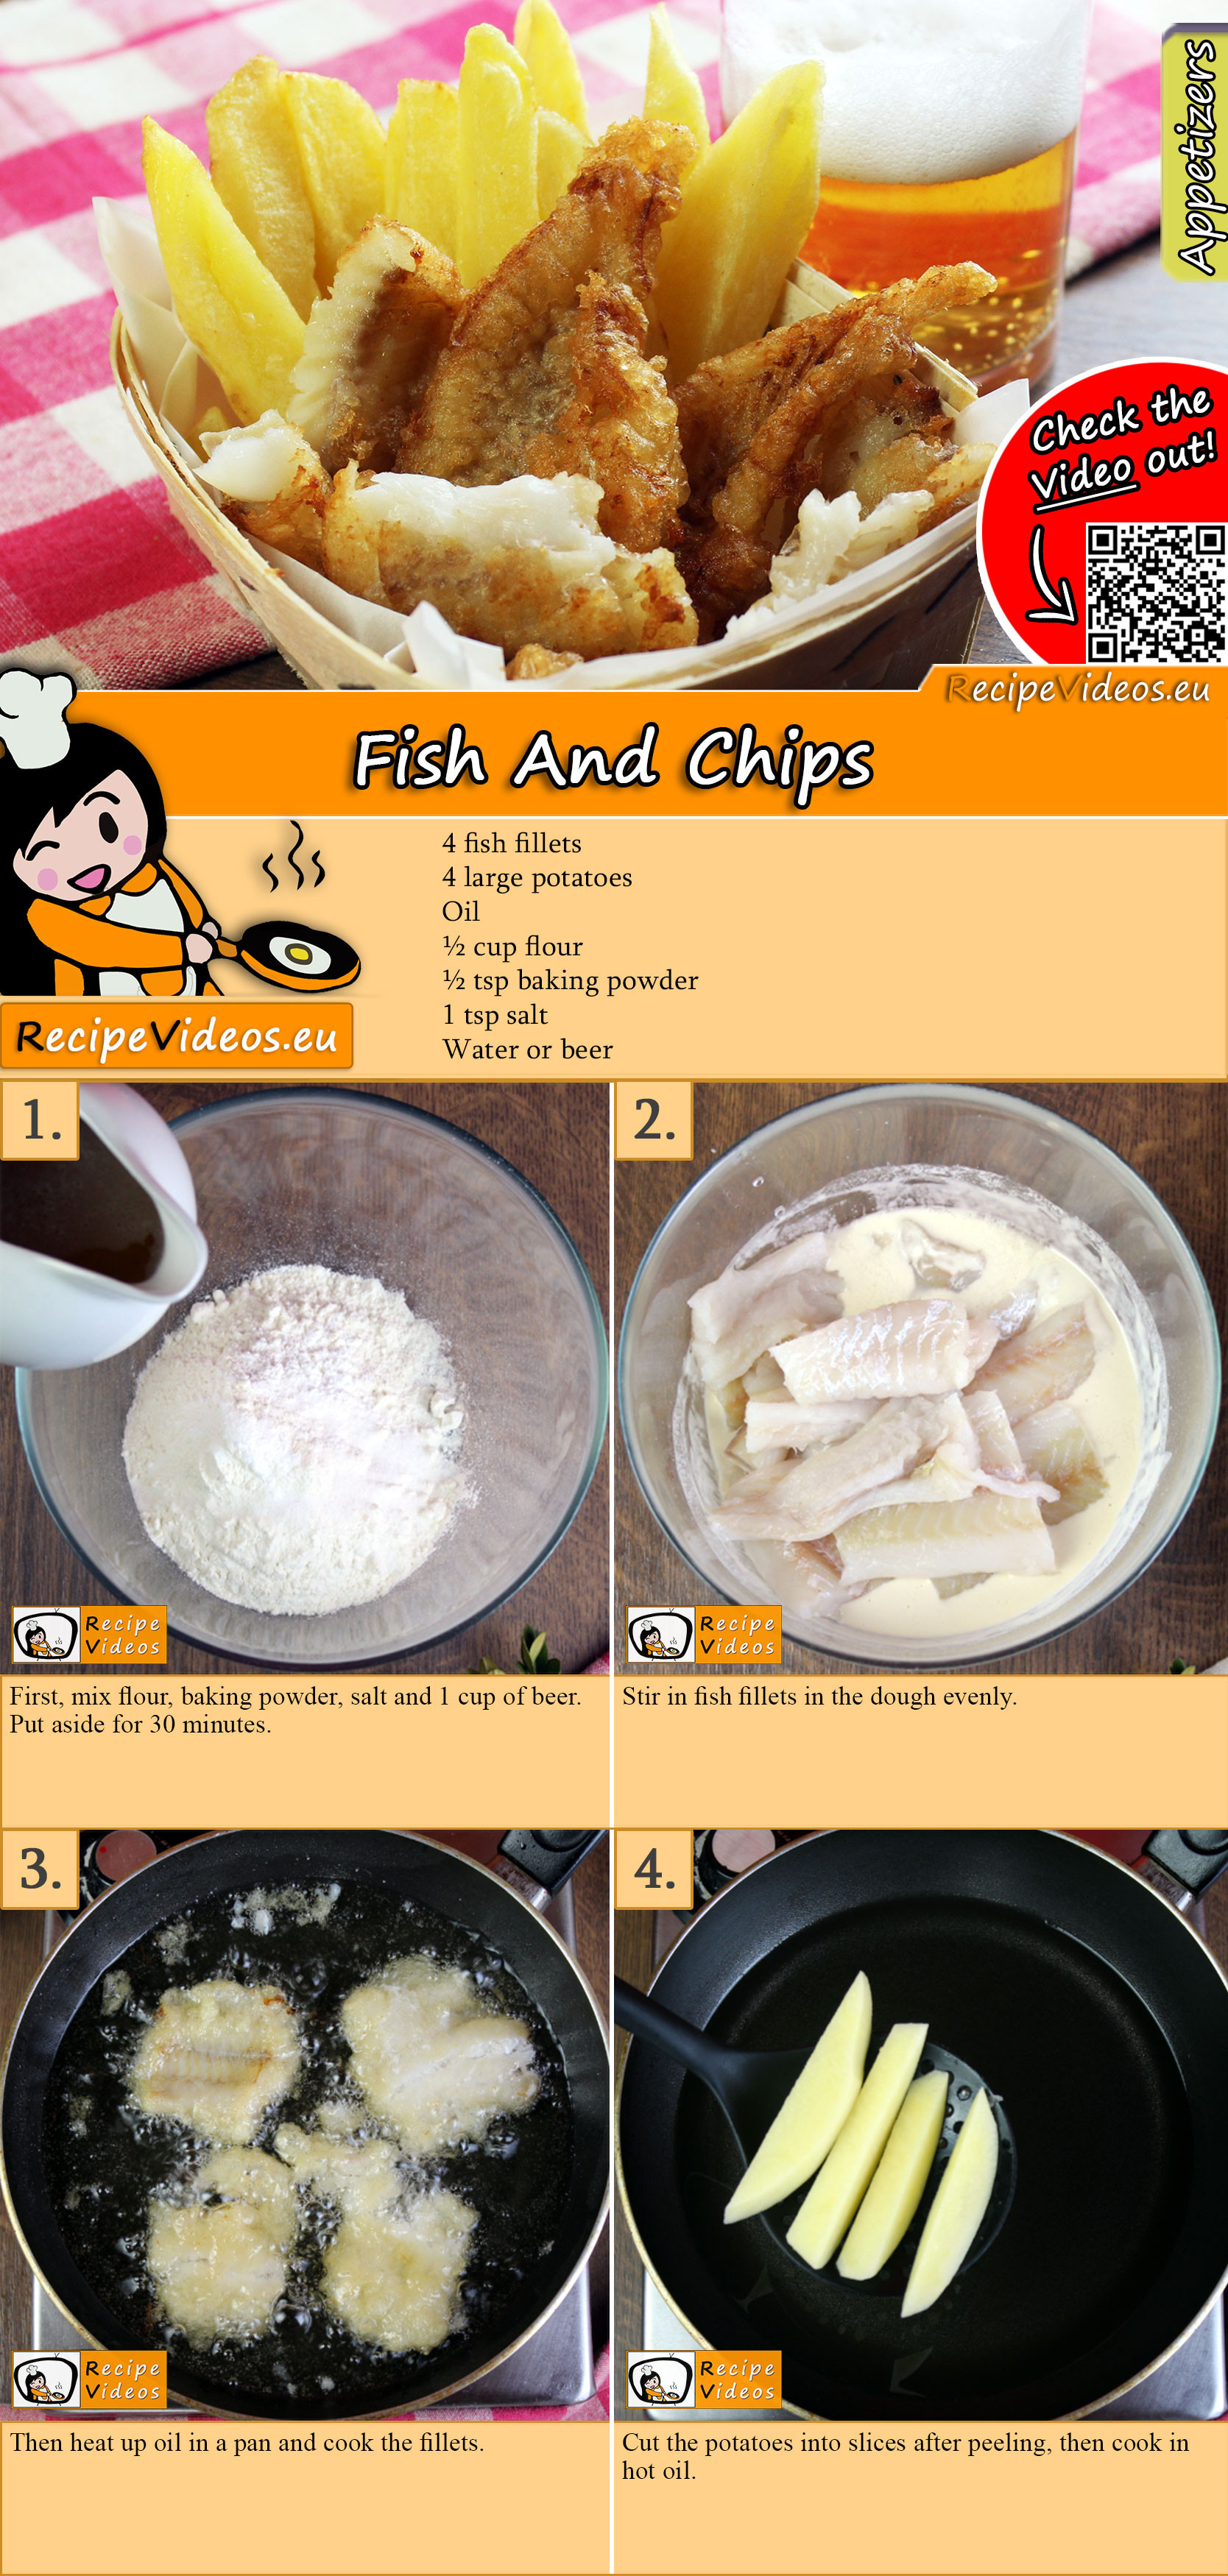 Fish And Chips recipe with video